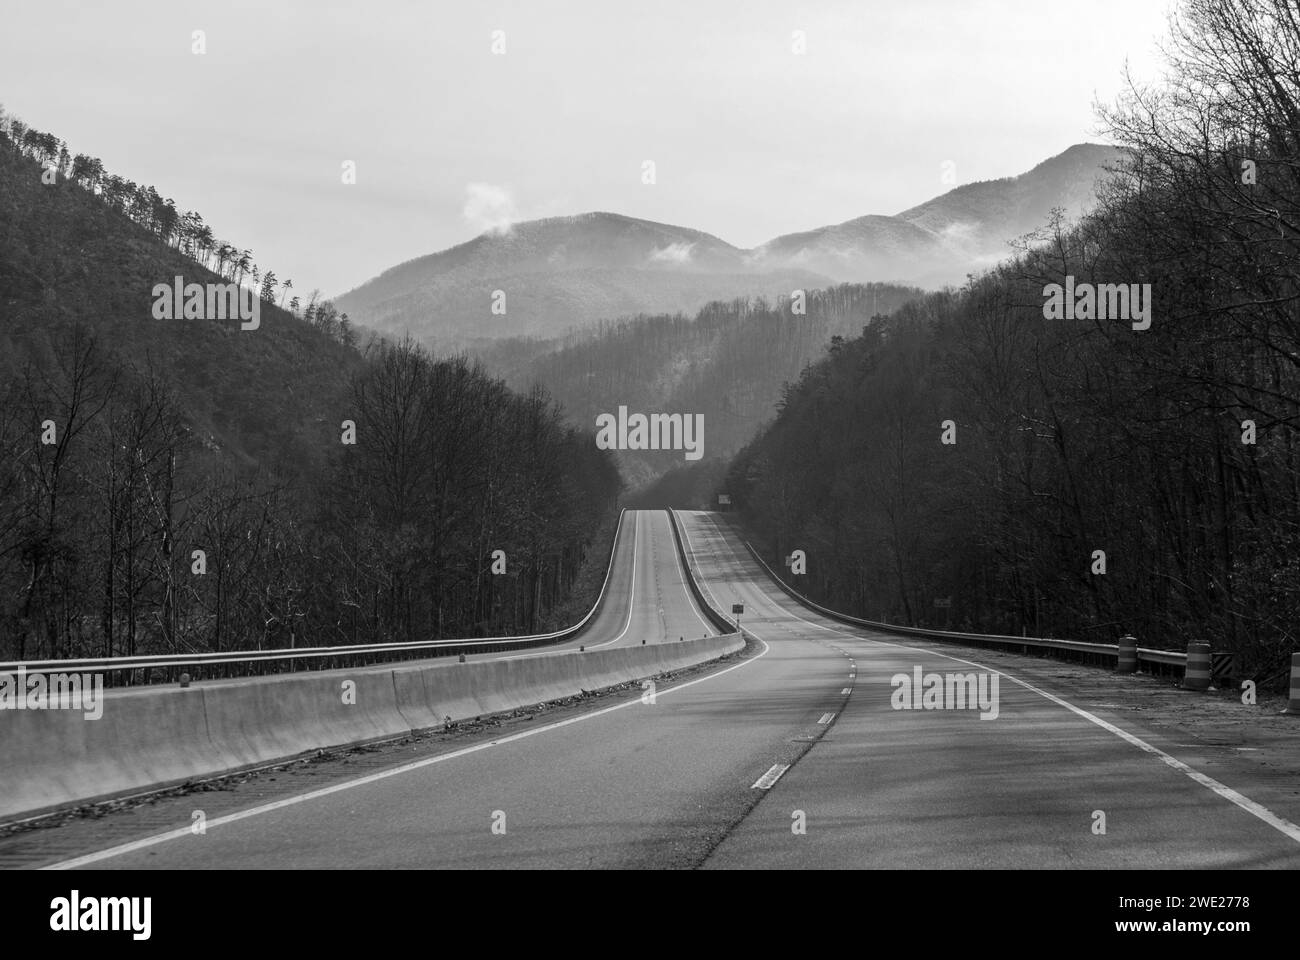 Interstate 40 in the Mountains of East Tennessee Stock Photo